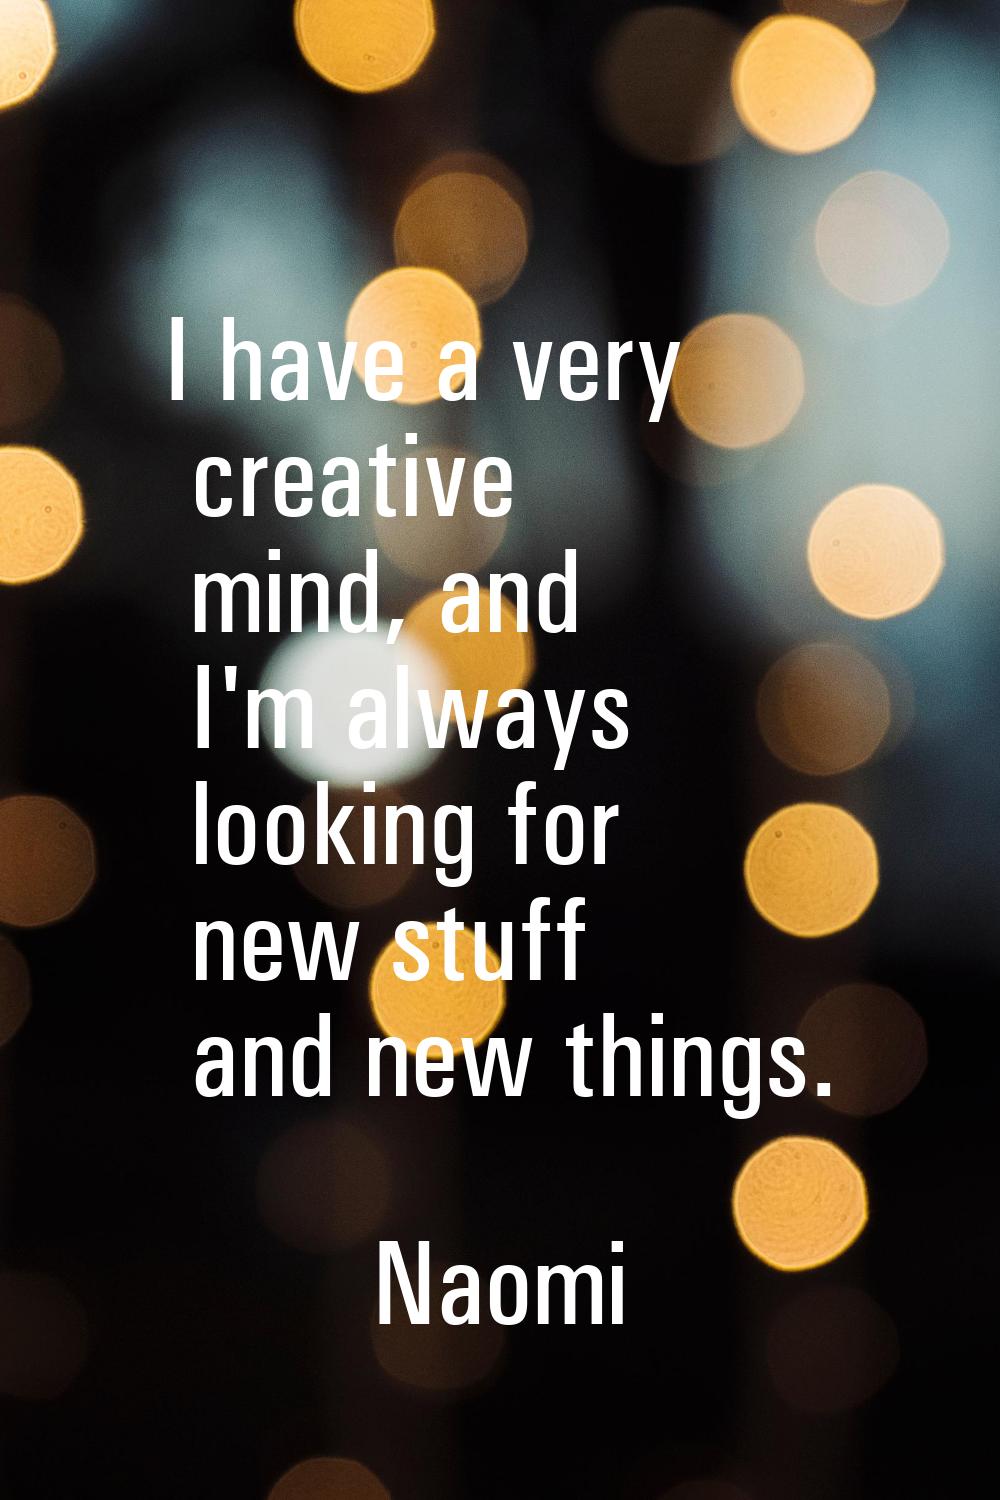 I have a very creative mind, and I'm always looking for new stuff and new things.